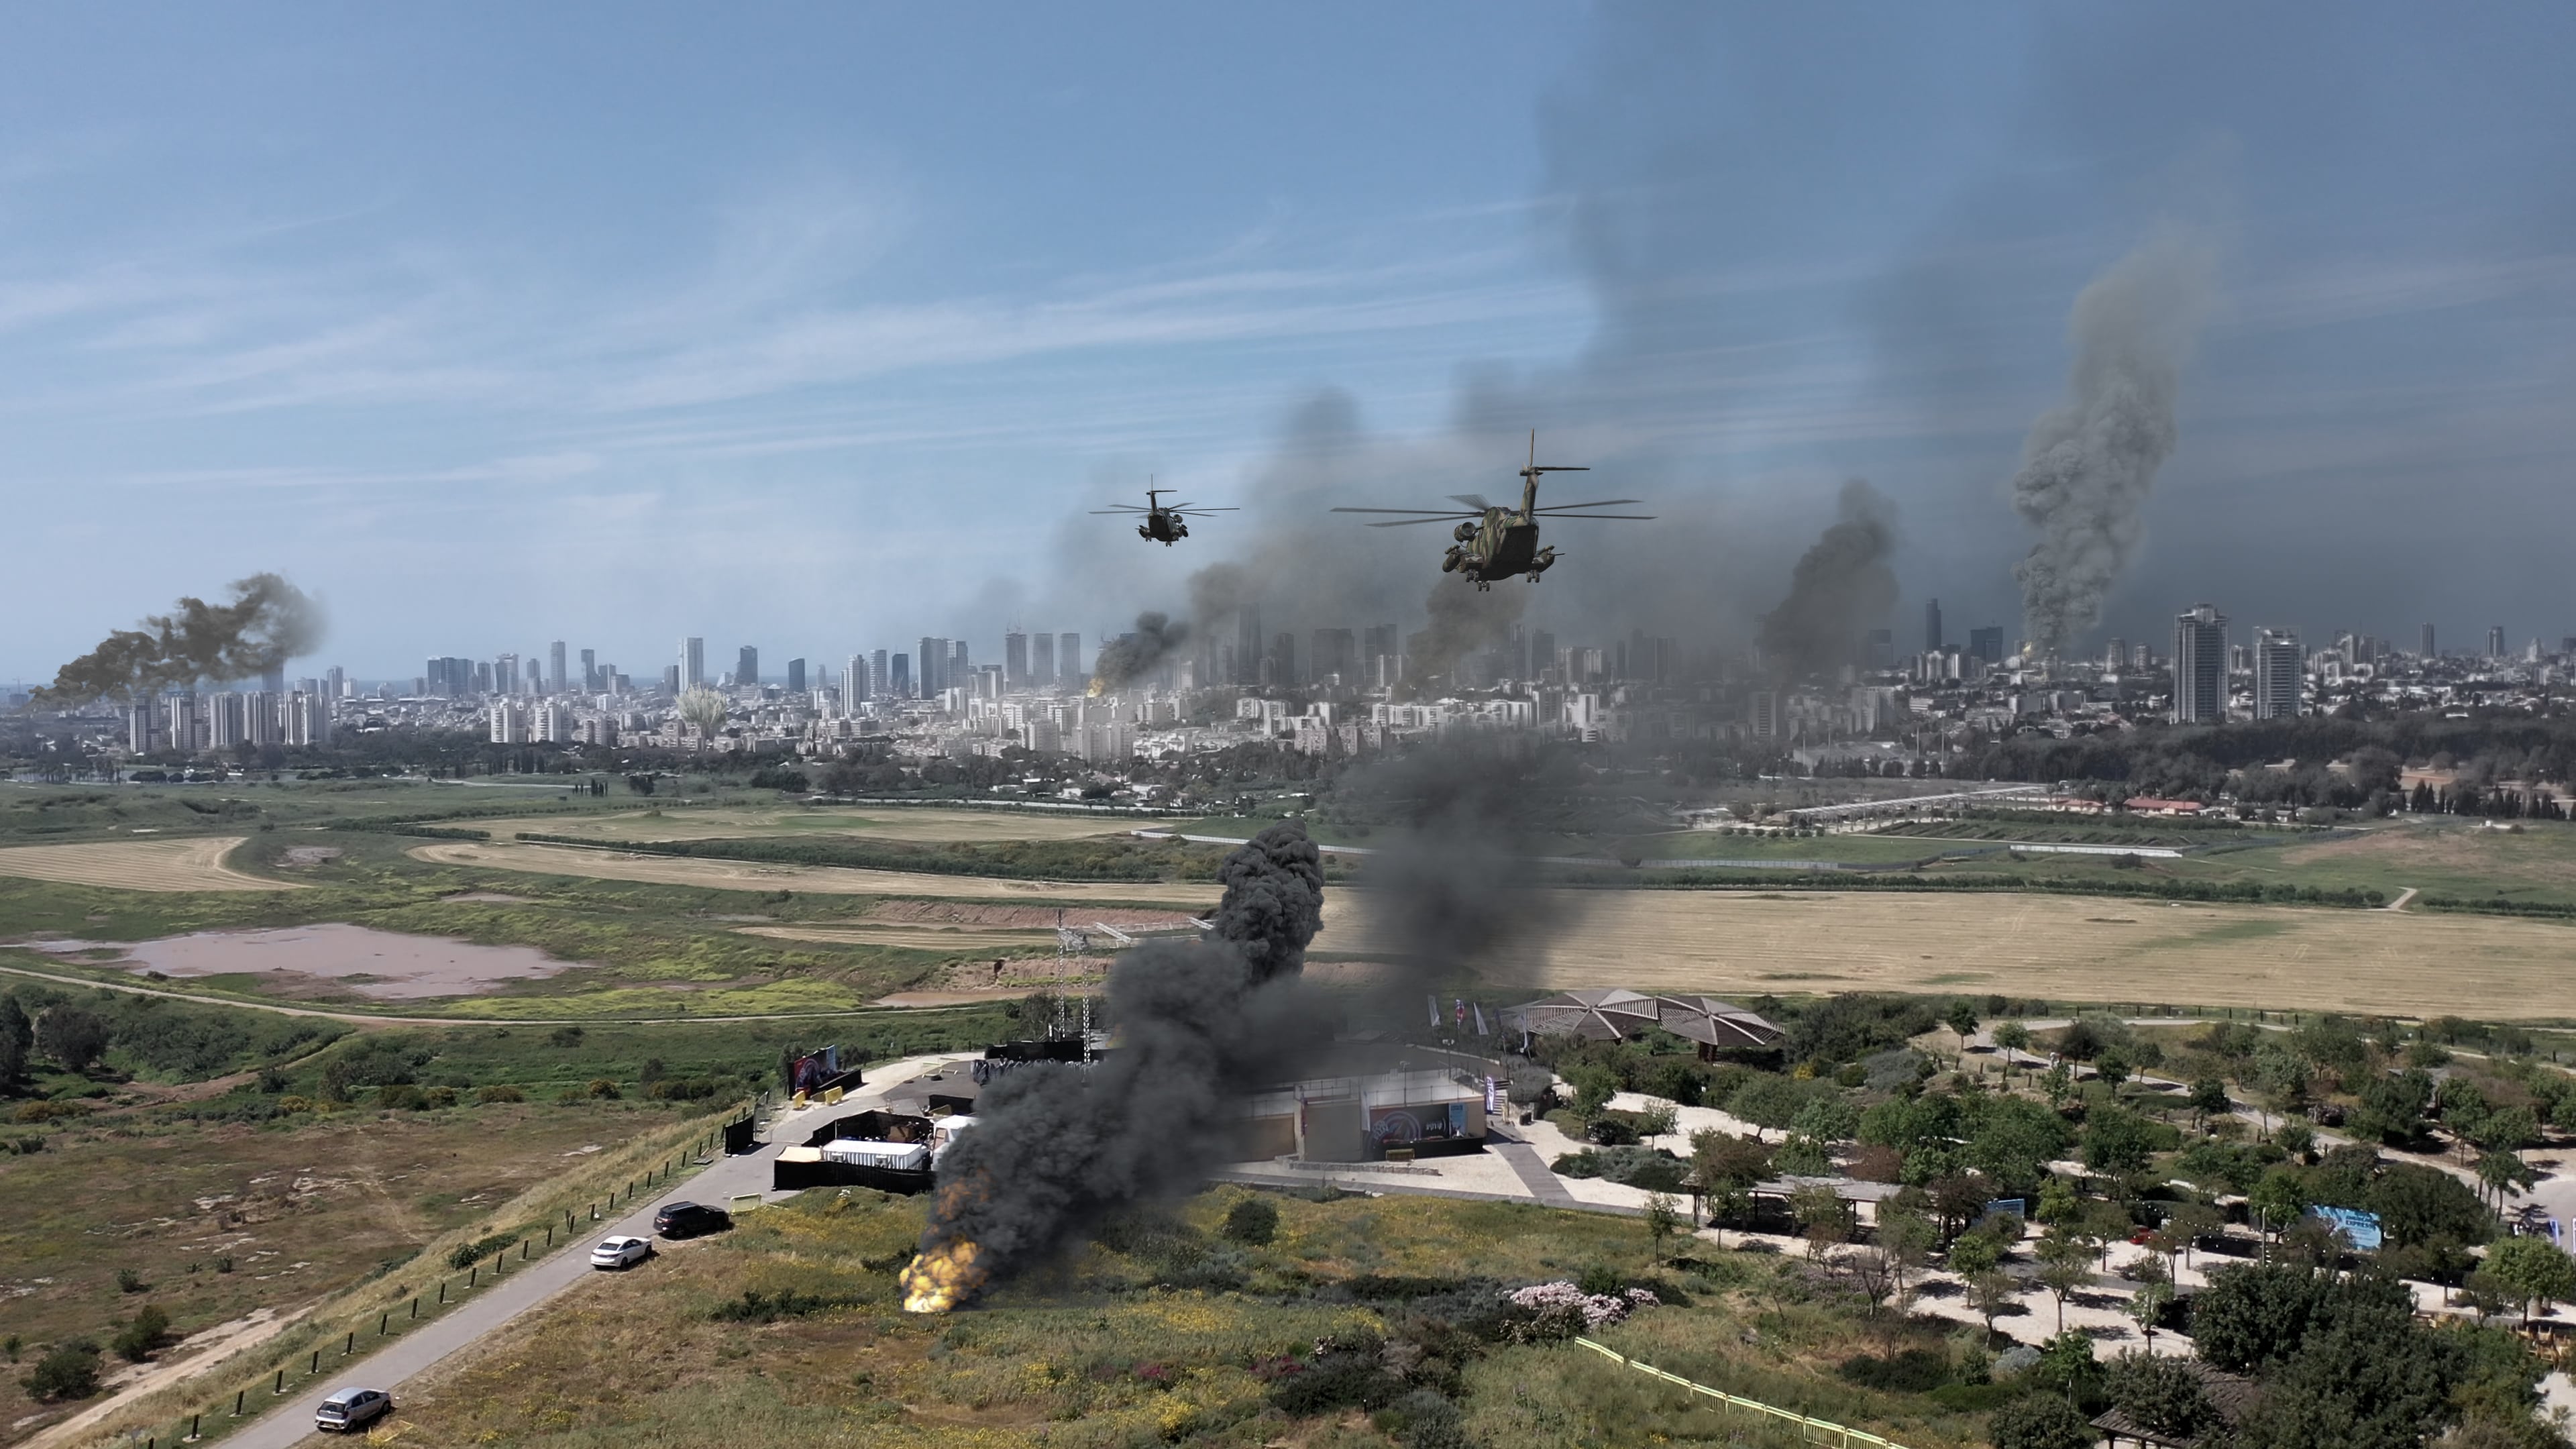 Israeli helicopters flying towards Tel Aviv and over smoking buildings